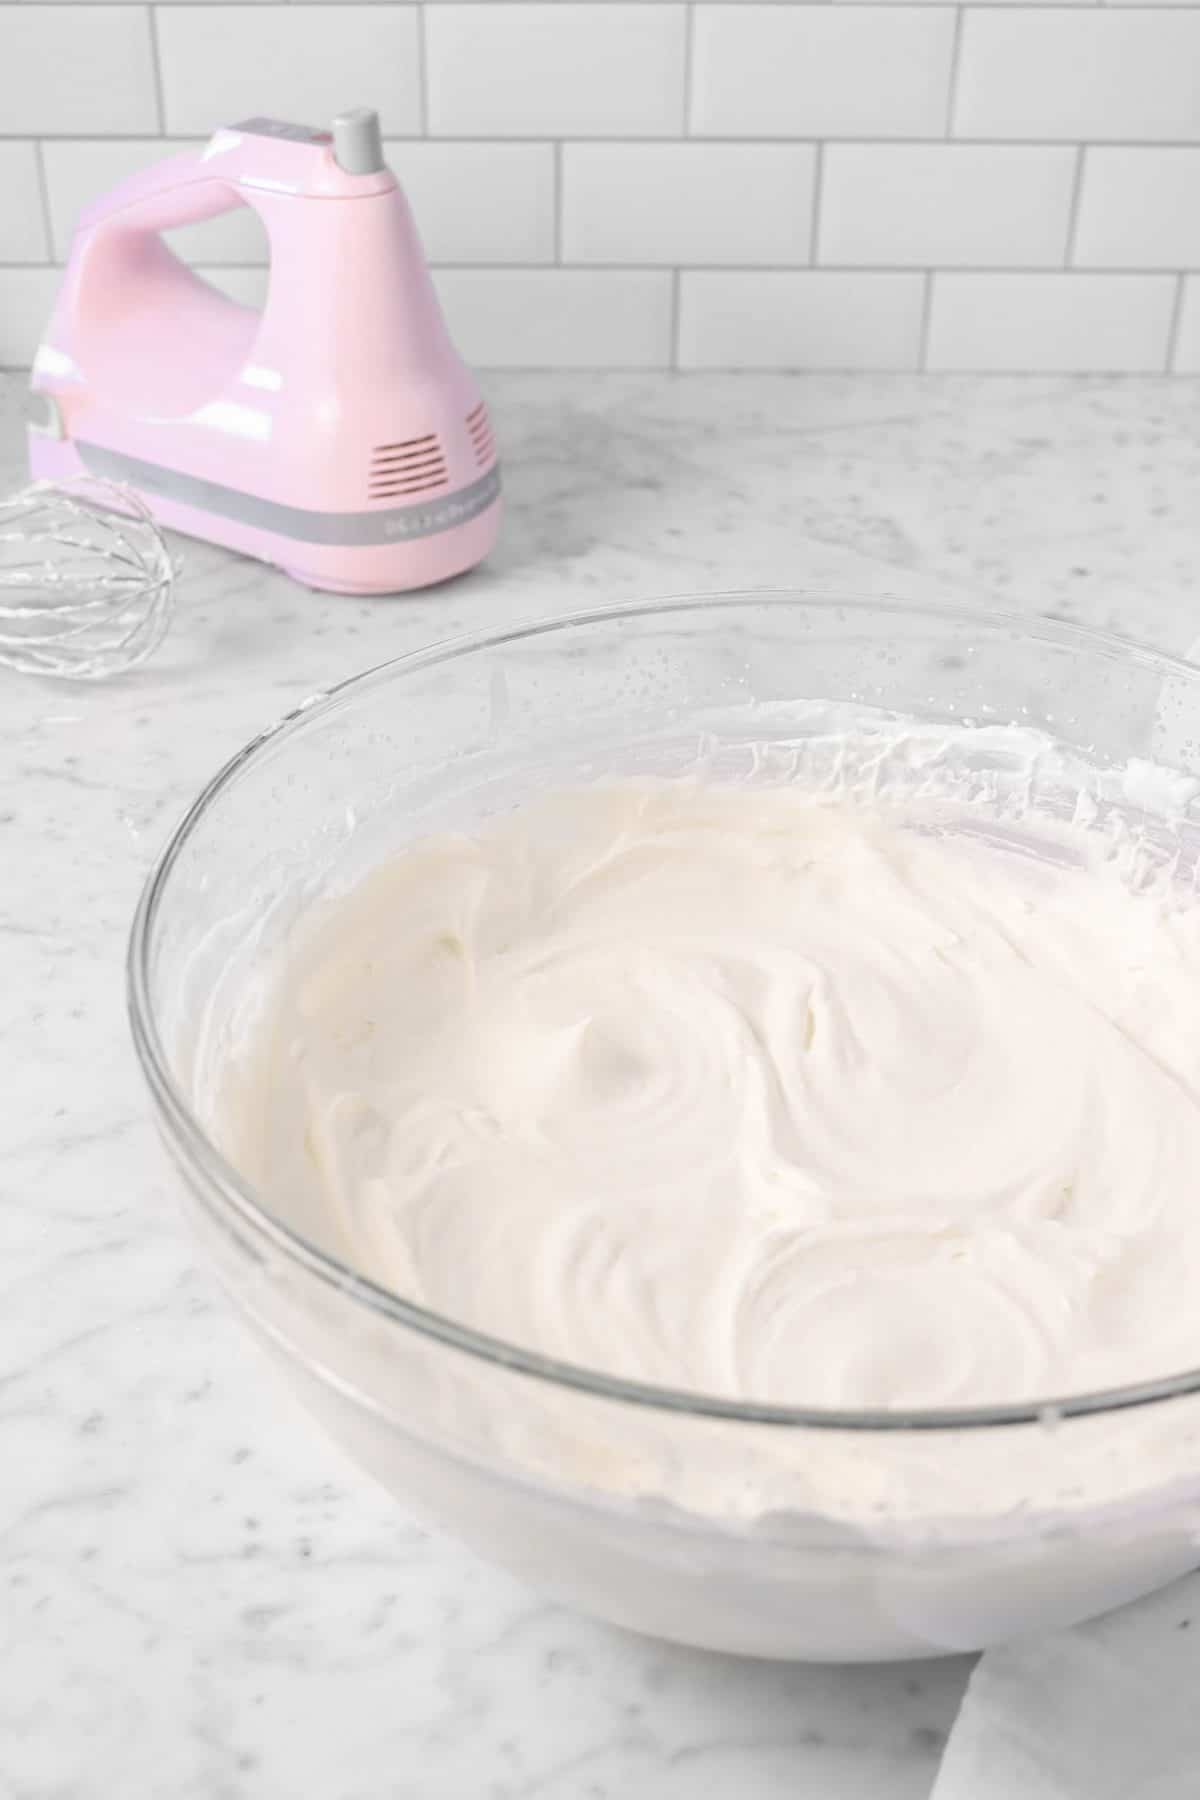 chantilly cream in a glass bowl with a pink hand mixer on a marble counter